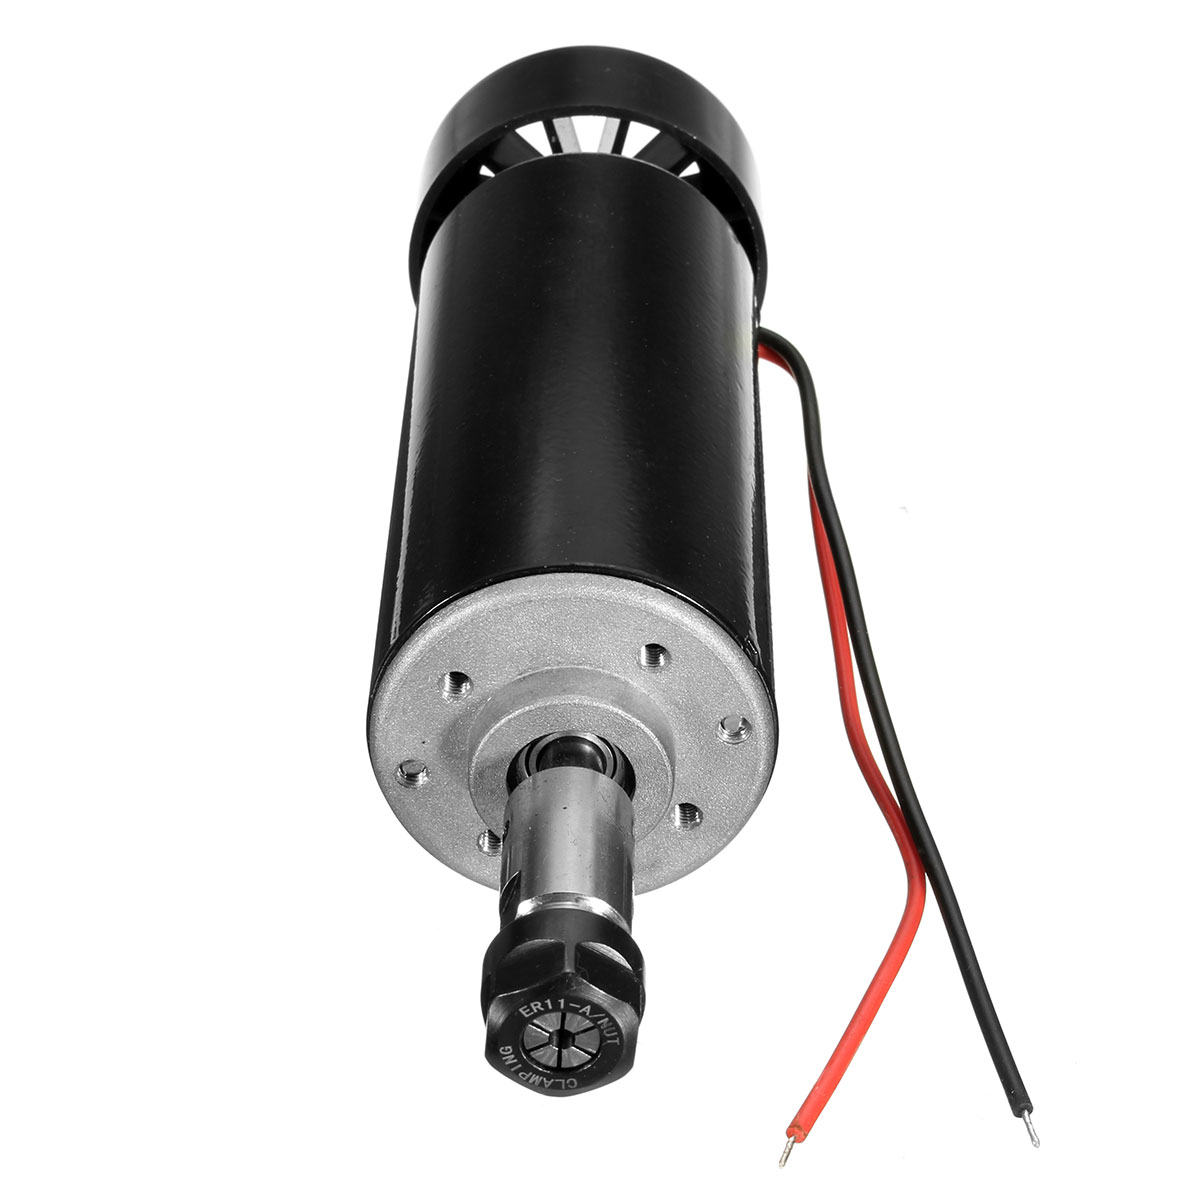 ER11 500W Brushed Spindle Motor，12000 RPM High Speed Brushed PCB Spindle Motor DIY Engraver Accessories，for Solid Wood PCB Carving Drilling 